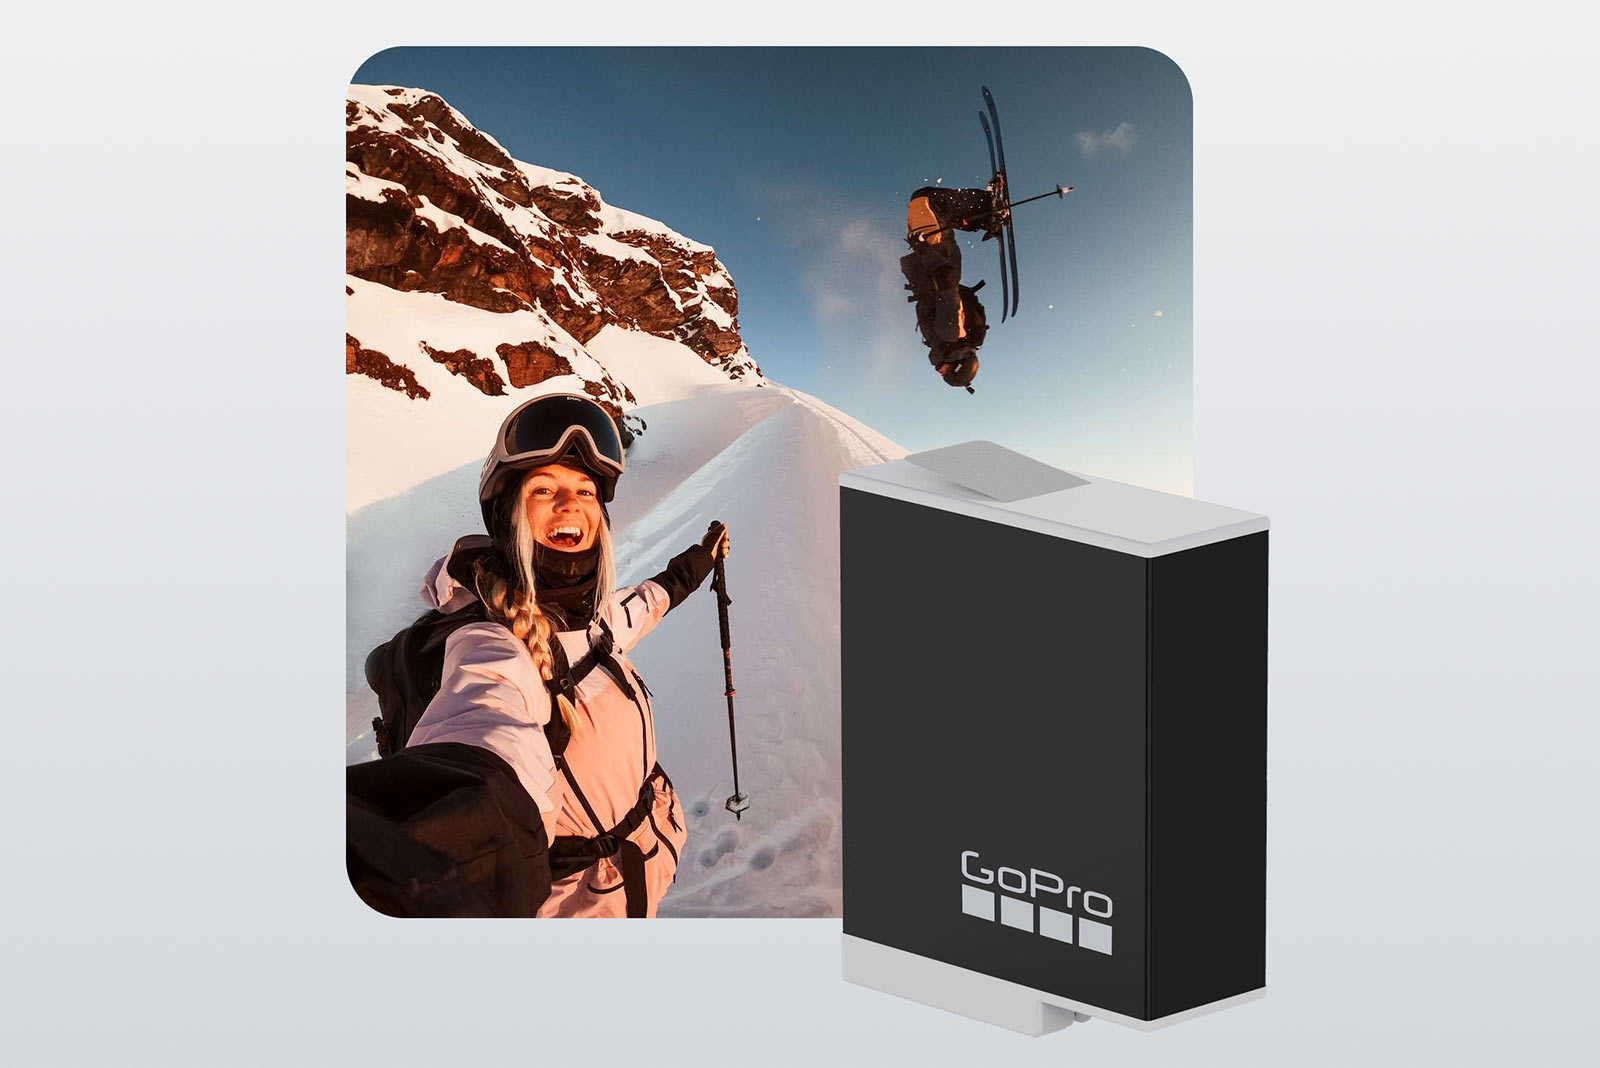 gopro enduro battery is a longer laster action camera battery